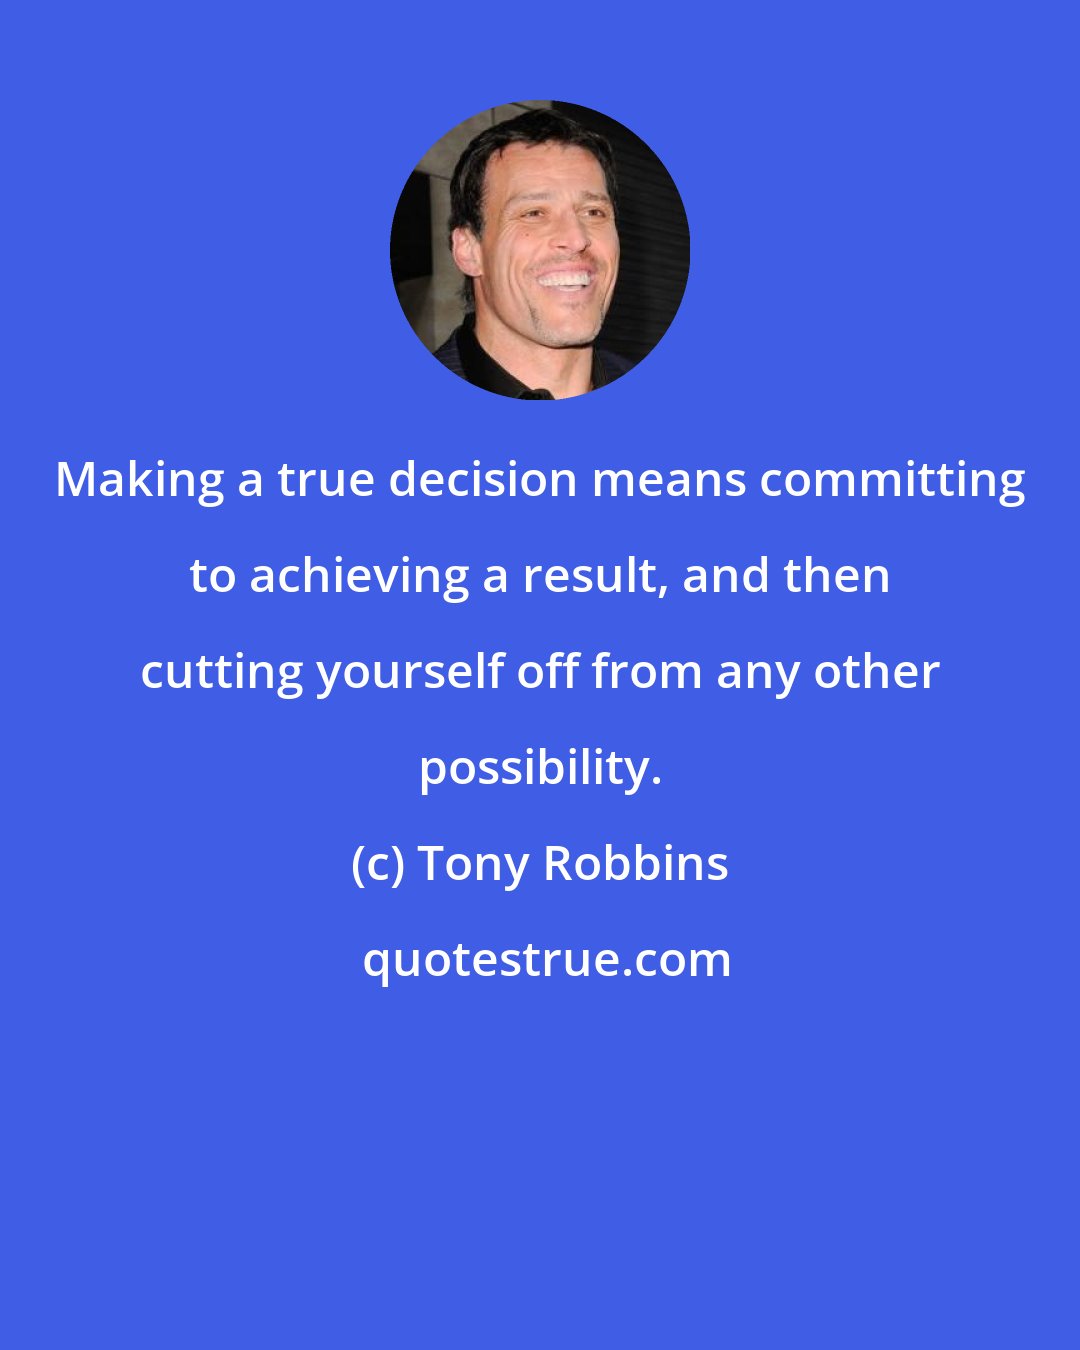 Tony Robbins: Making a true decision means committing to achieving a result, and then cutting yourself off from any other possibility.